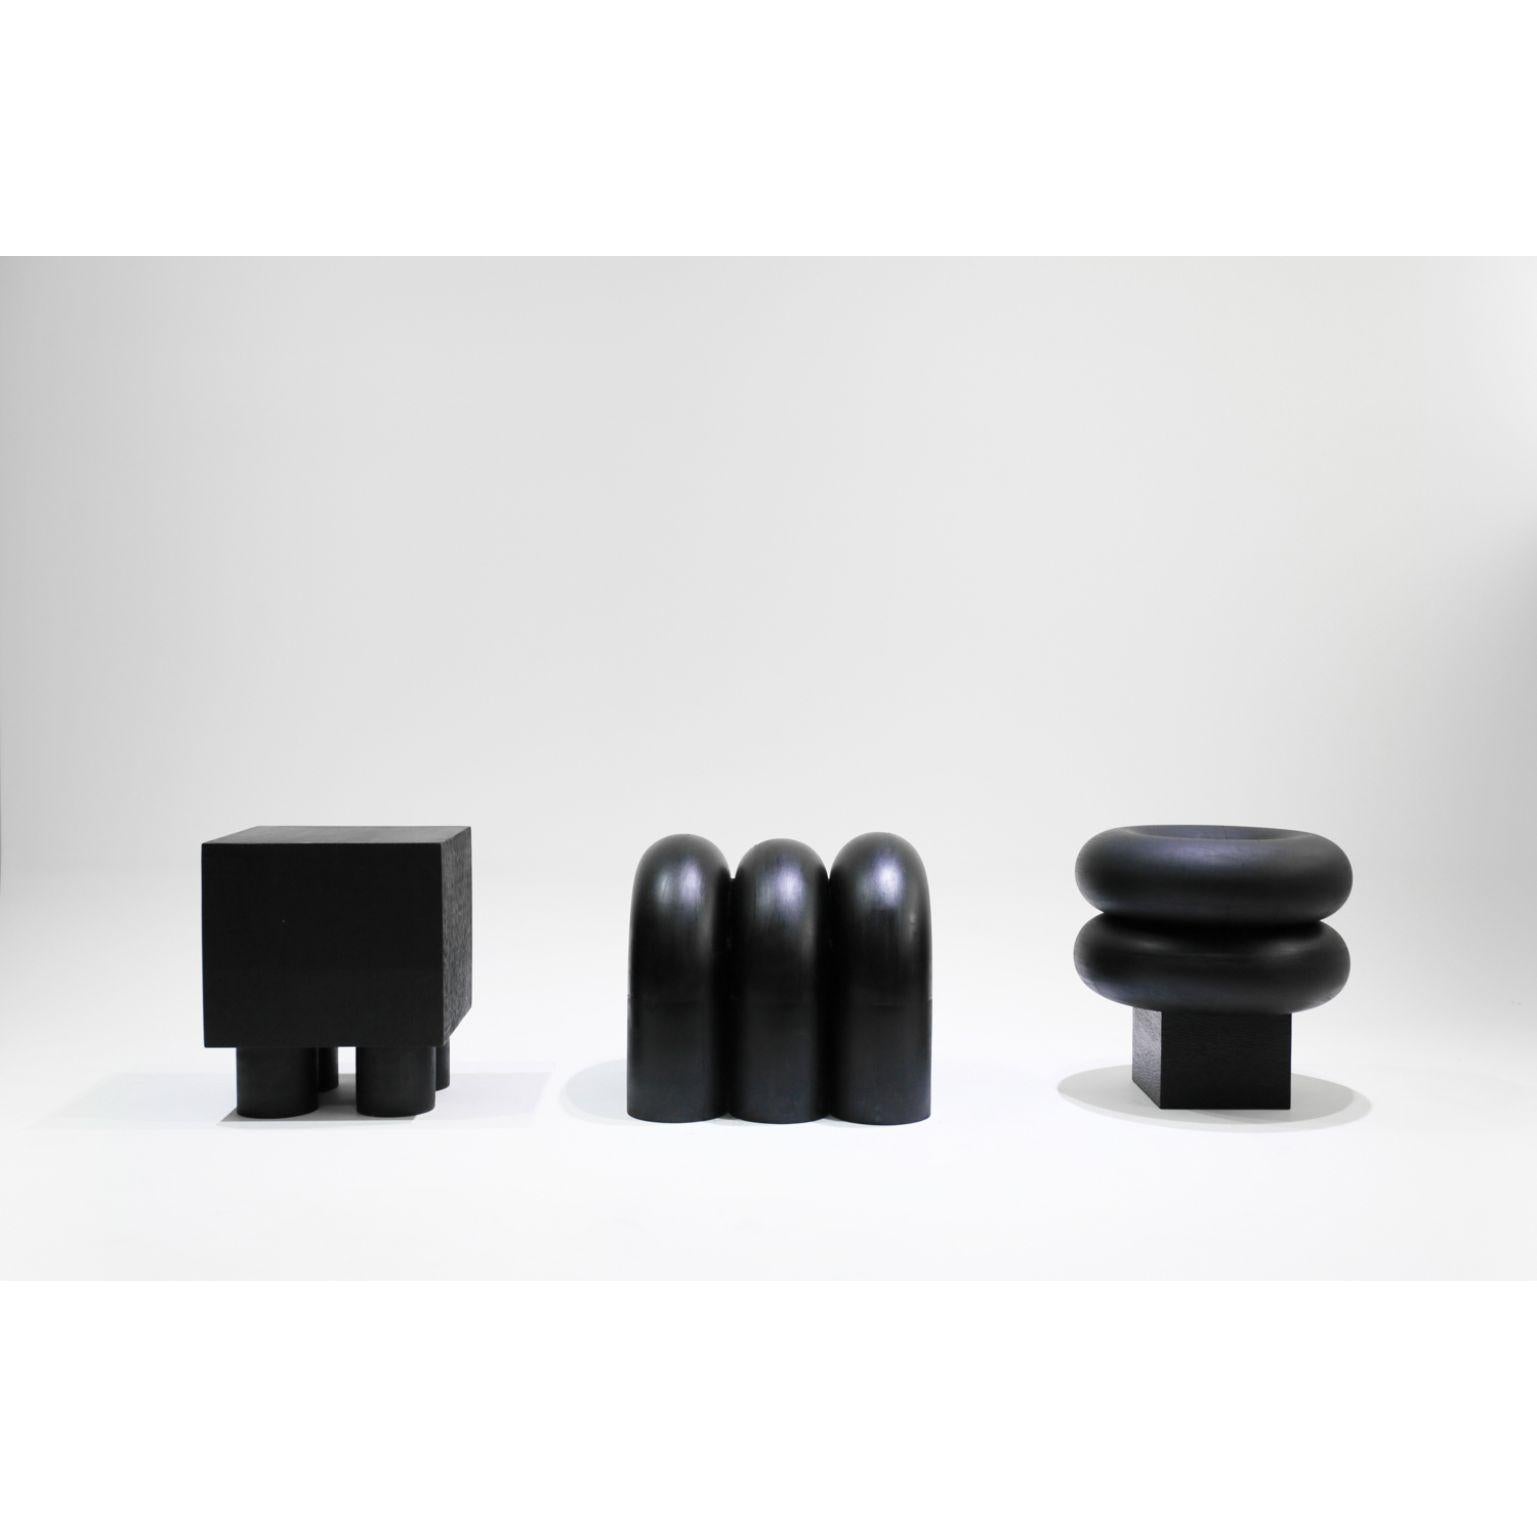 Set of 3 Time of Action by Chaeyoung Lee
Materials: Ebonized and Carved Wood
Dimensions: 100 x 100 x 50 cm

Time of Action is a minimal and carefully crafted furniture collection created by South Korean-based designer Chaeyoung Lee.
Time of